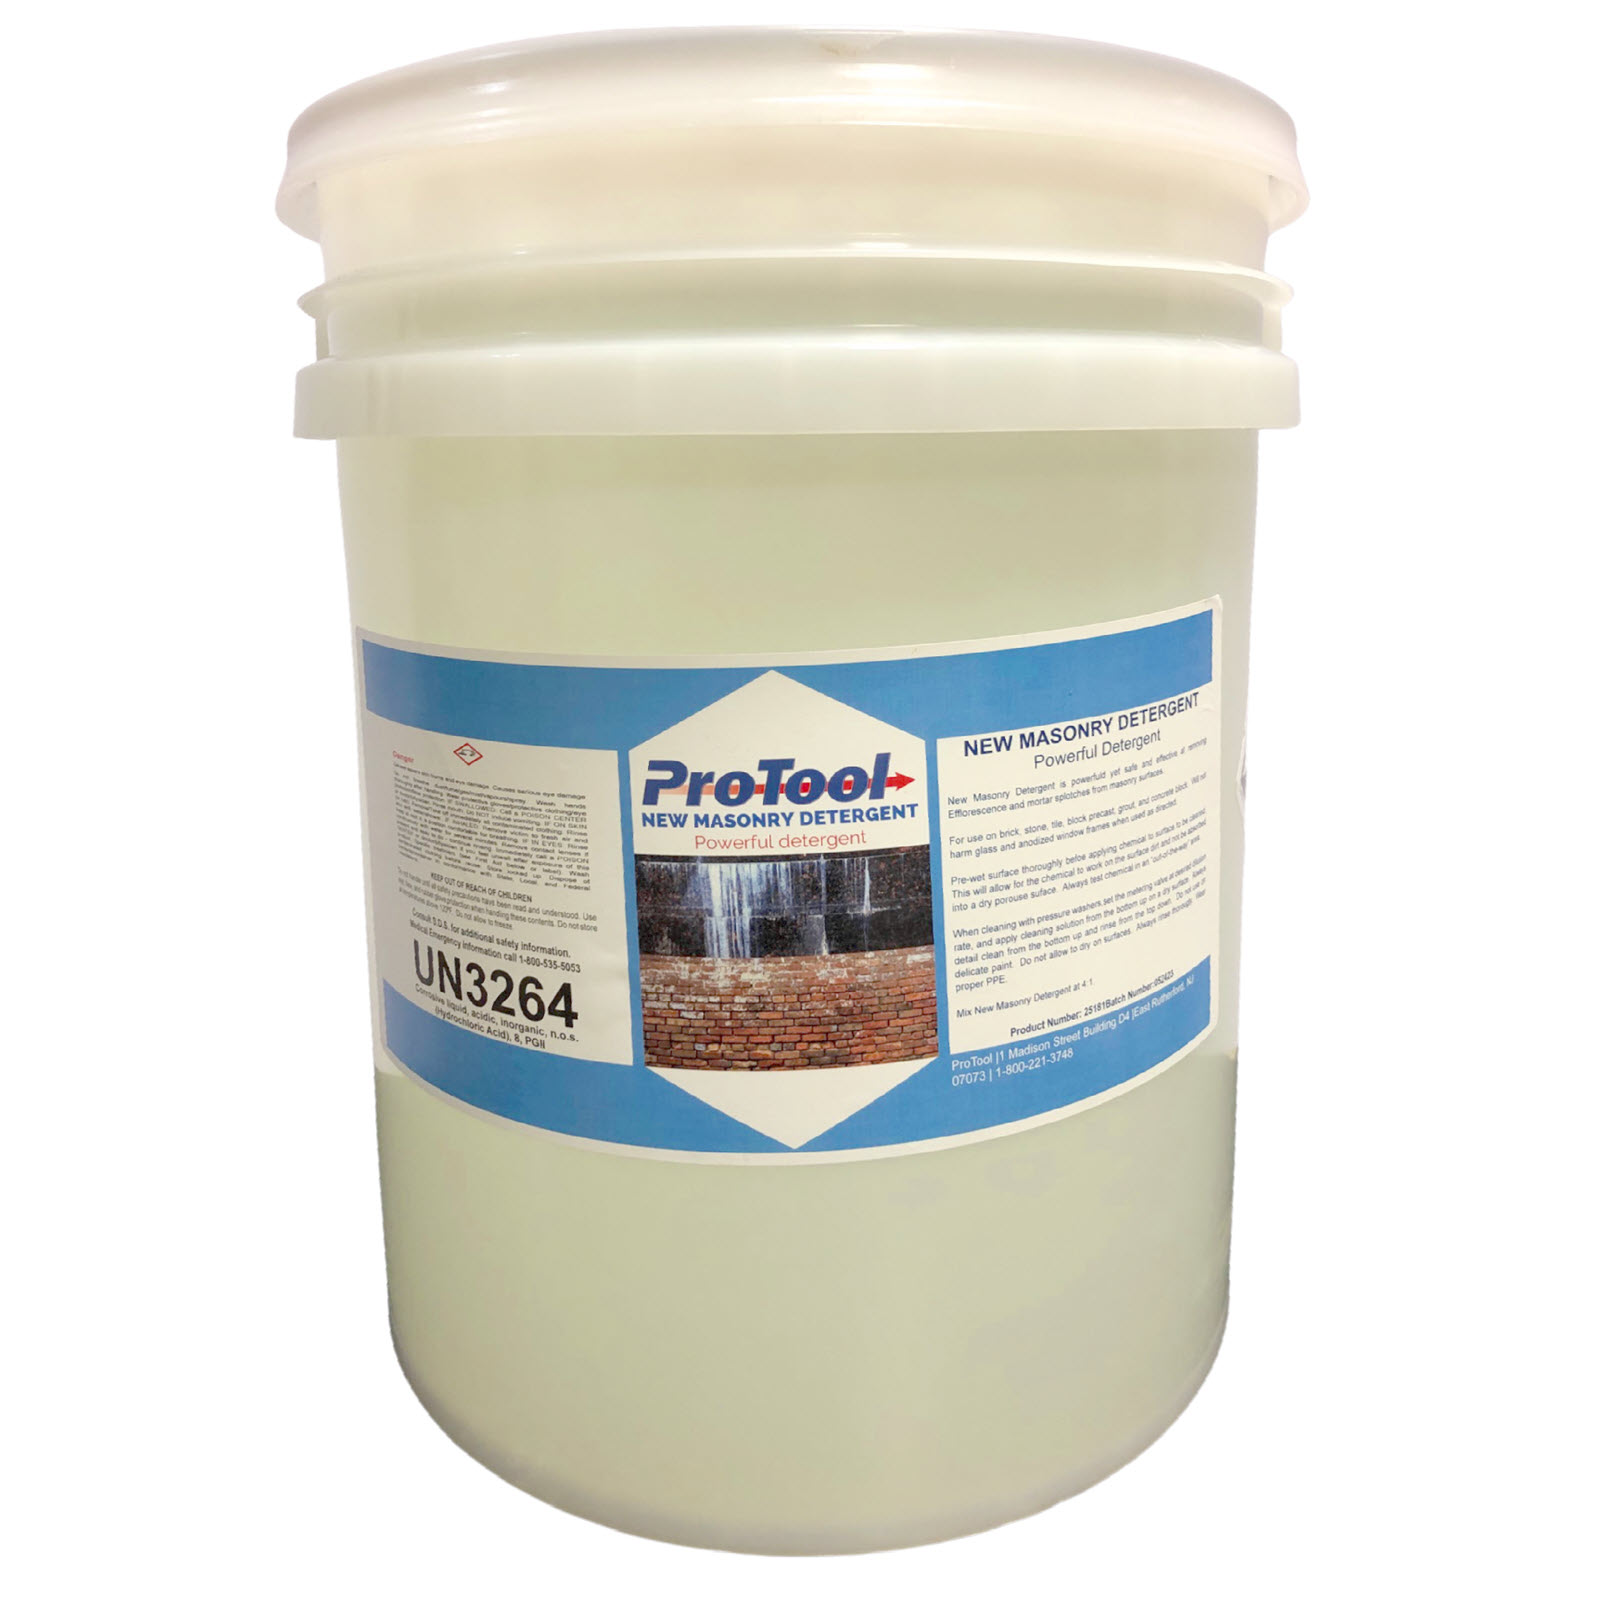 ProTool New Masonry Detergent Questions & Answers